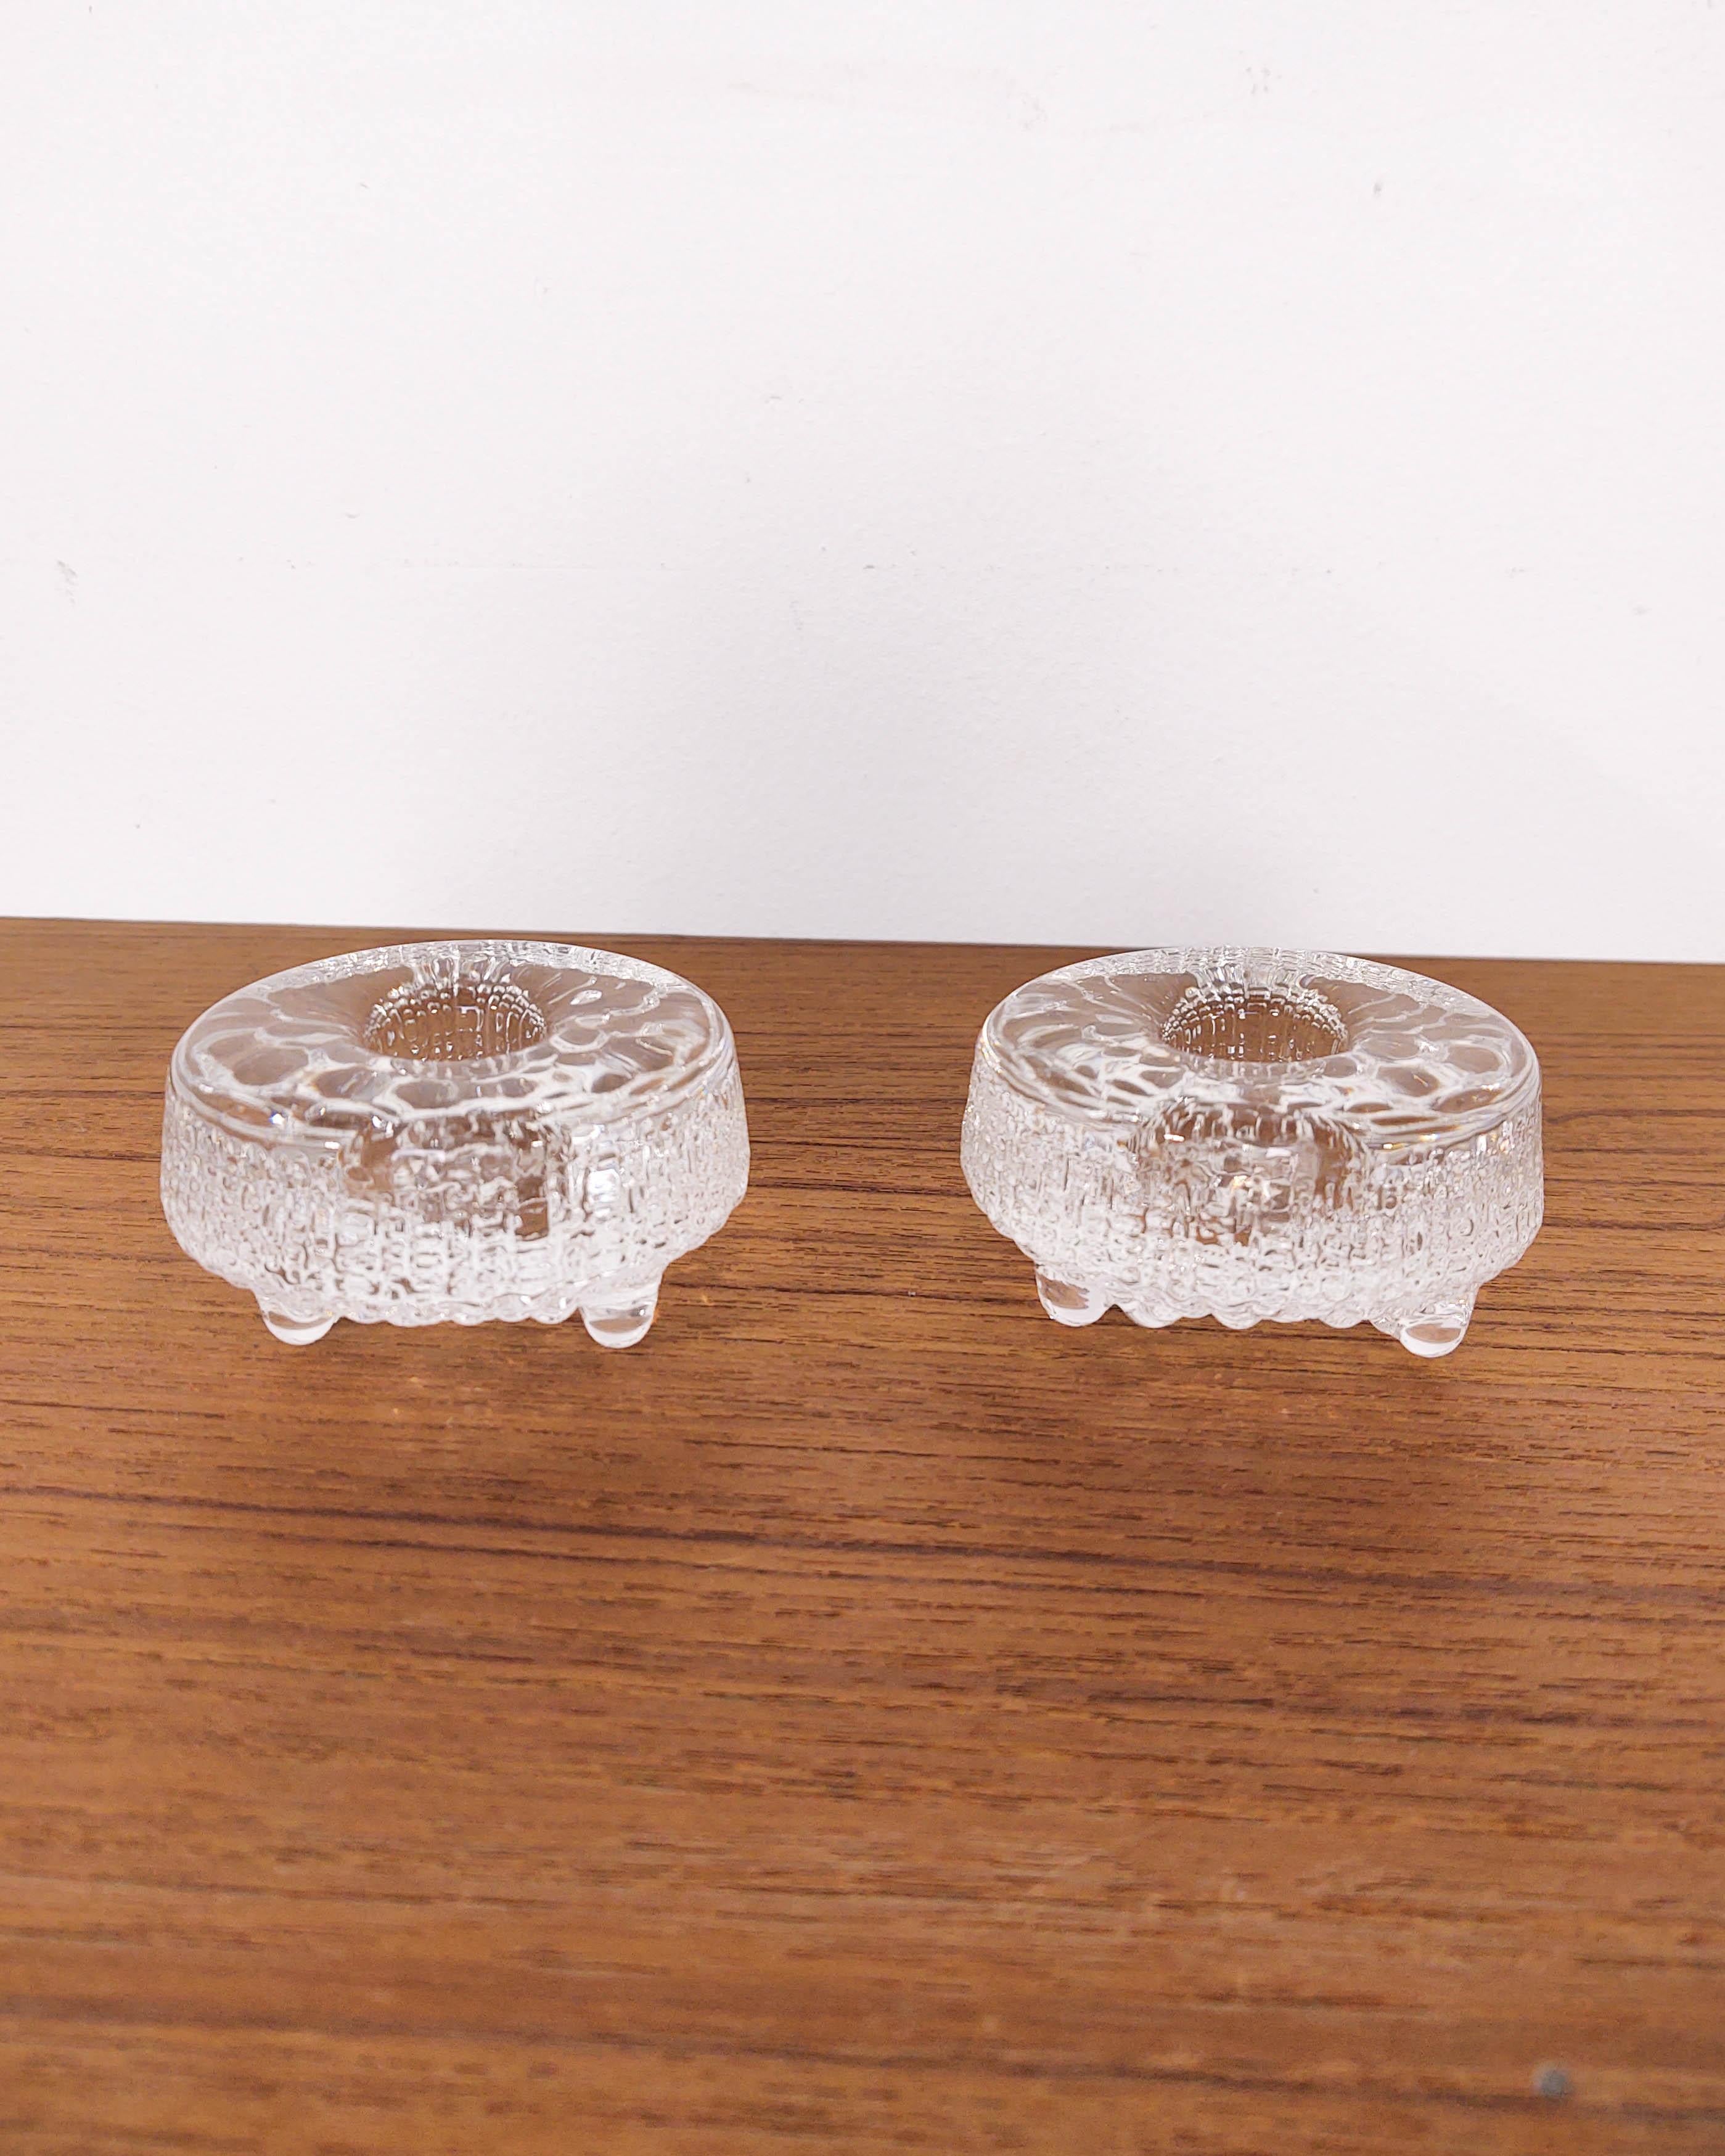 Finnish Pair of Ultima Thule Candle Holders by Tapio Wirkkala for Iittala, Finland